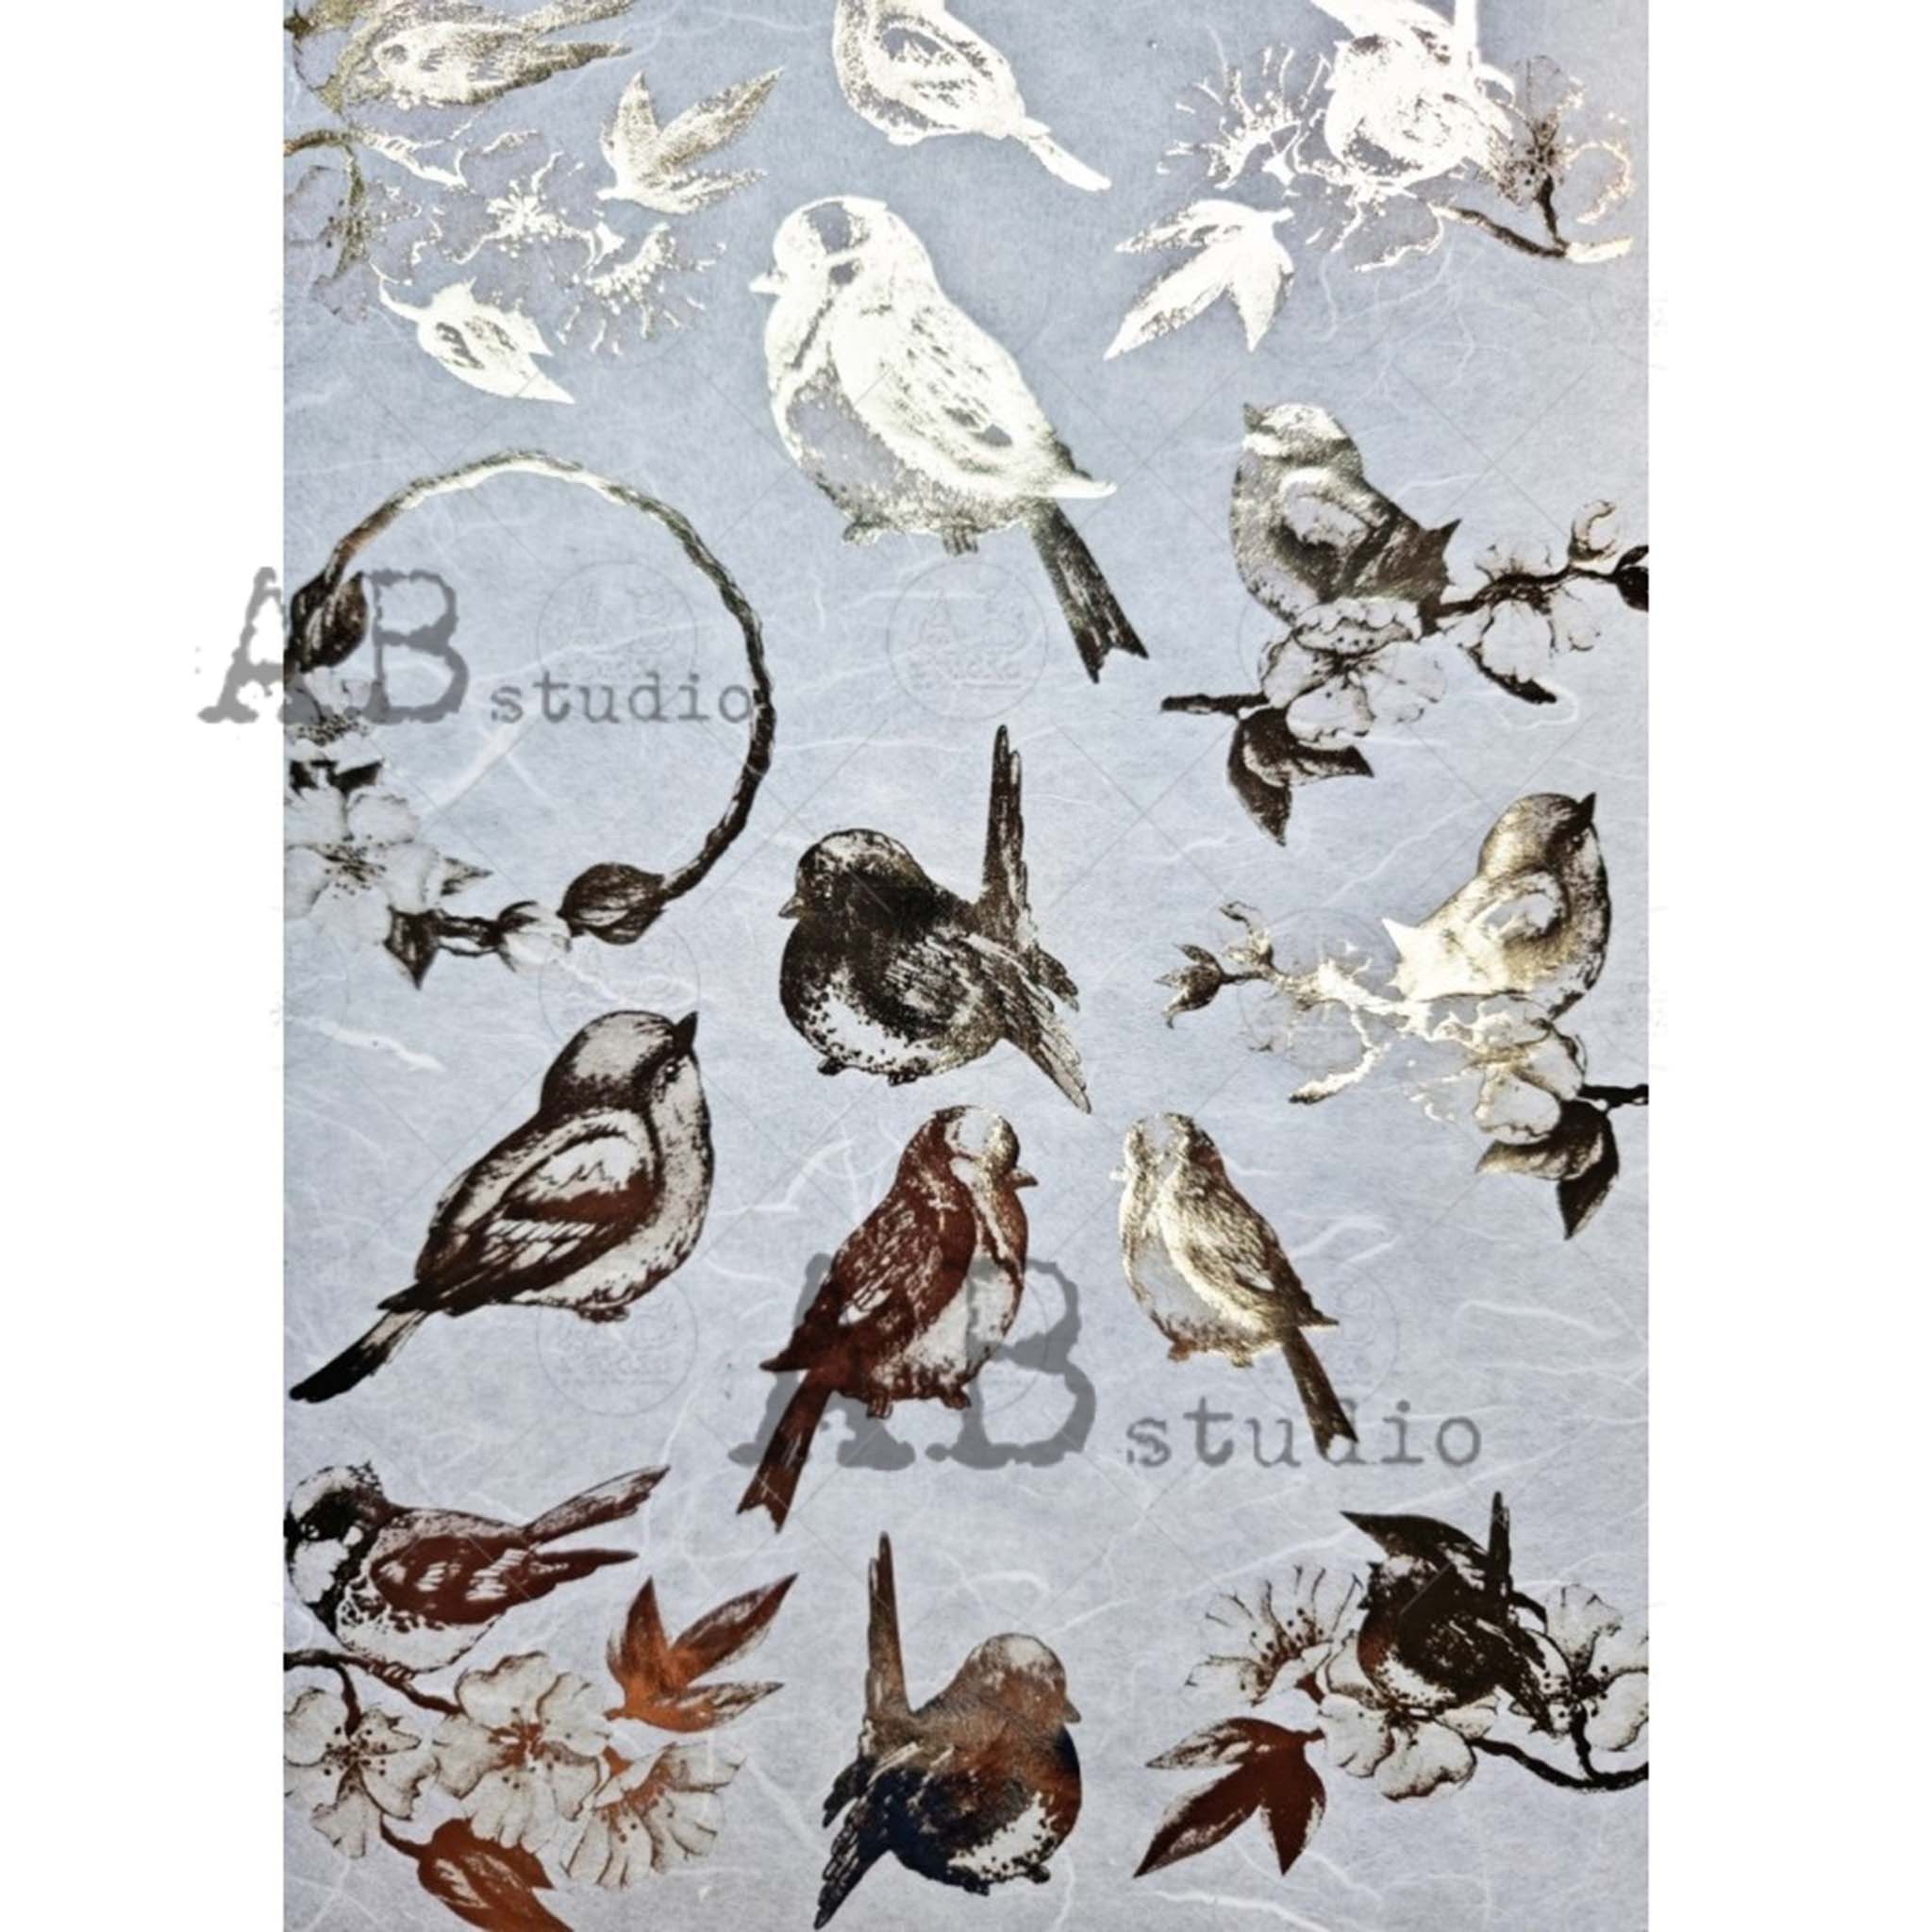 A4 rice paper design that features metallic gilded birds on a subtly distressed background. White borders are on the sides.